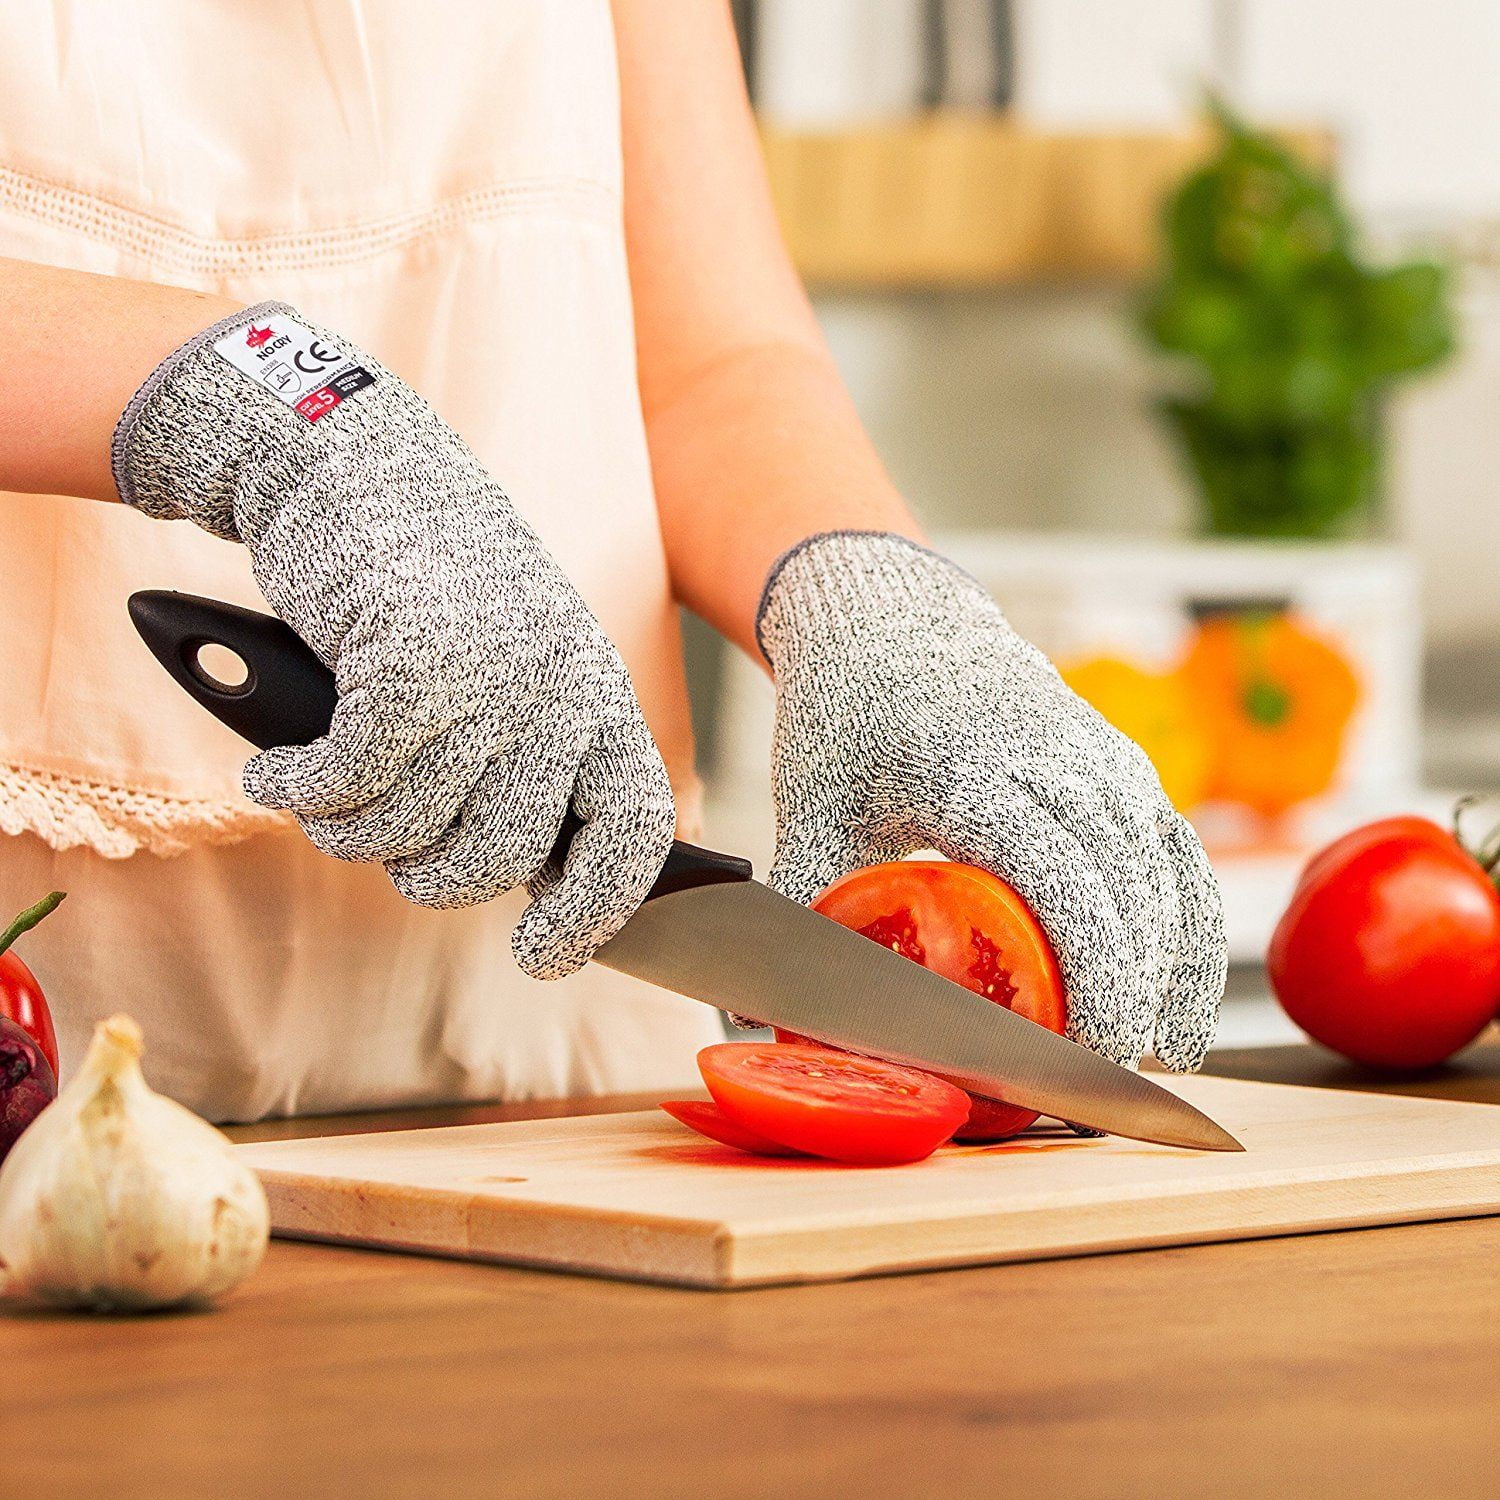 NoCry Cut Resistant Gloves Food Grade with 3 Touchscreen Capable Fingers;  Protective Kitchen Gloves for Cutting; Use Cut Gloves as Fish Gloves,  Butcher Gloves or Wood Carving Gloves, Small 